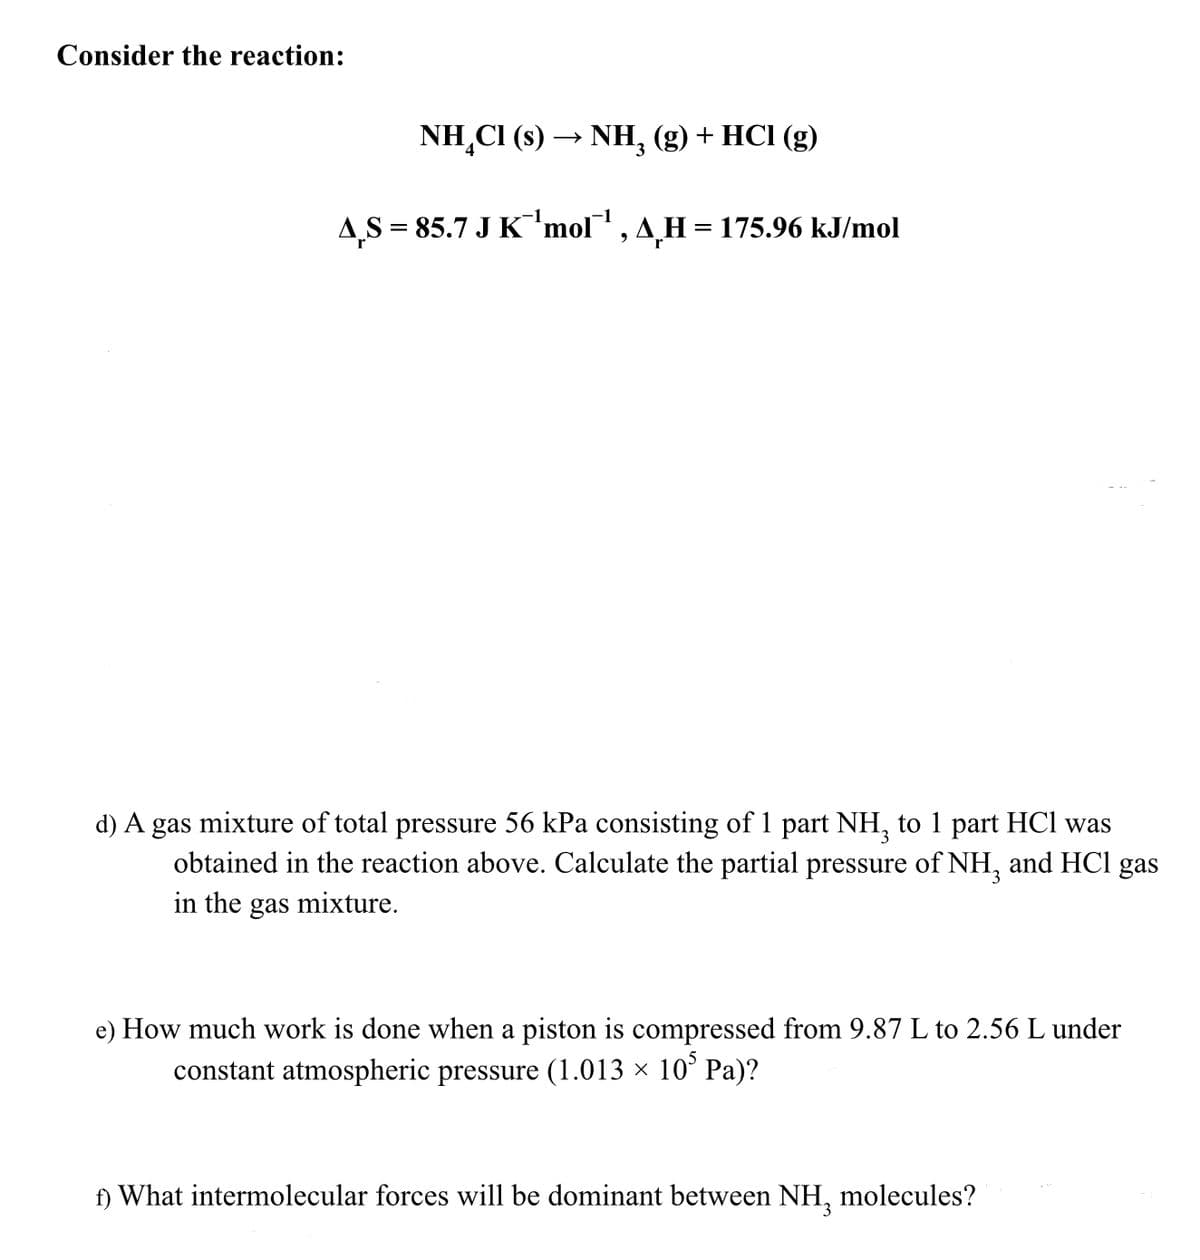 Consider the reaction:
NH₂Cl (s) →>> NH₂ (g) + HCl (g)
3
AS = 85.7 J K¯¨¹mol™¹, AH = 175.96 kJ/mol
d) A gas mixture of total pressure 56 kPa consisting of 1 part NH₂ to 1 part HCl was
obtained in the reaction above. Calculate the partial pressure of NH3 and HCl gas
in the gas mixture.
e) How much work is done when a piston is compressed from 9.87 L to 2.56 L under
constant atmospheric pressure (1.013 × 10³ Pa)?
f) What intermolecular forces will be dominant between NH₂ molecules?